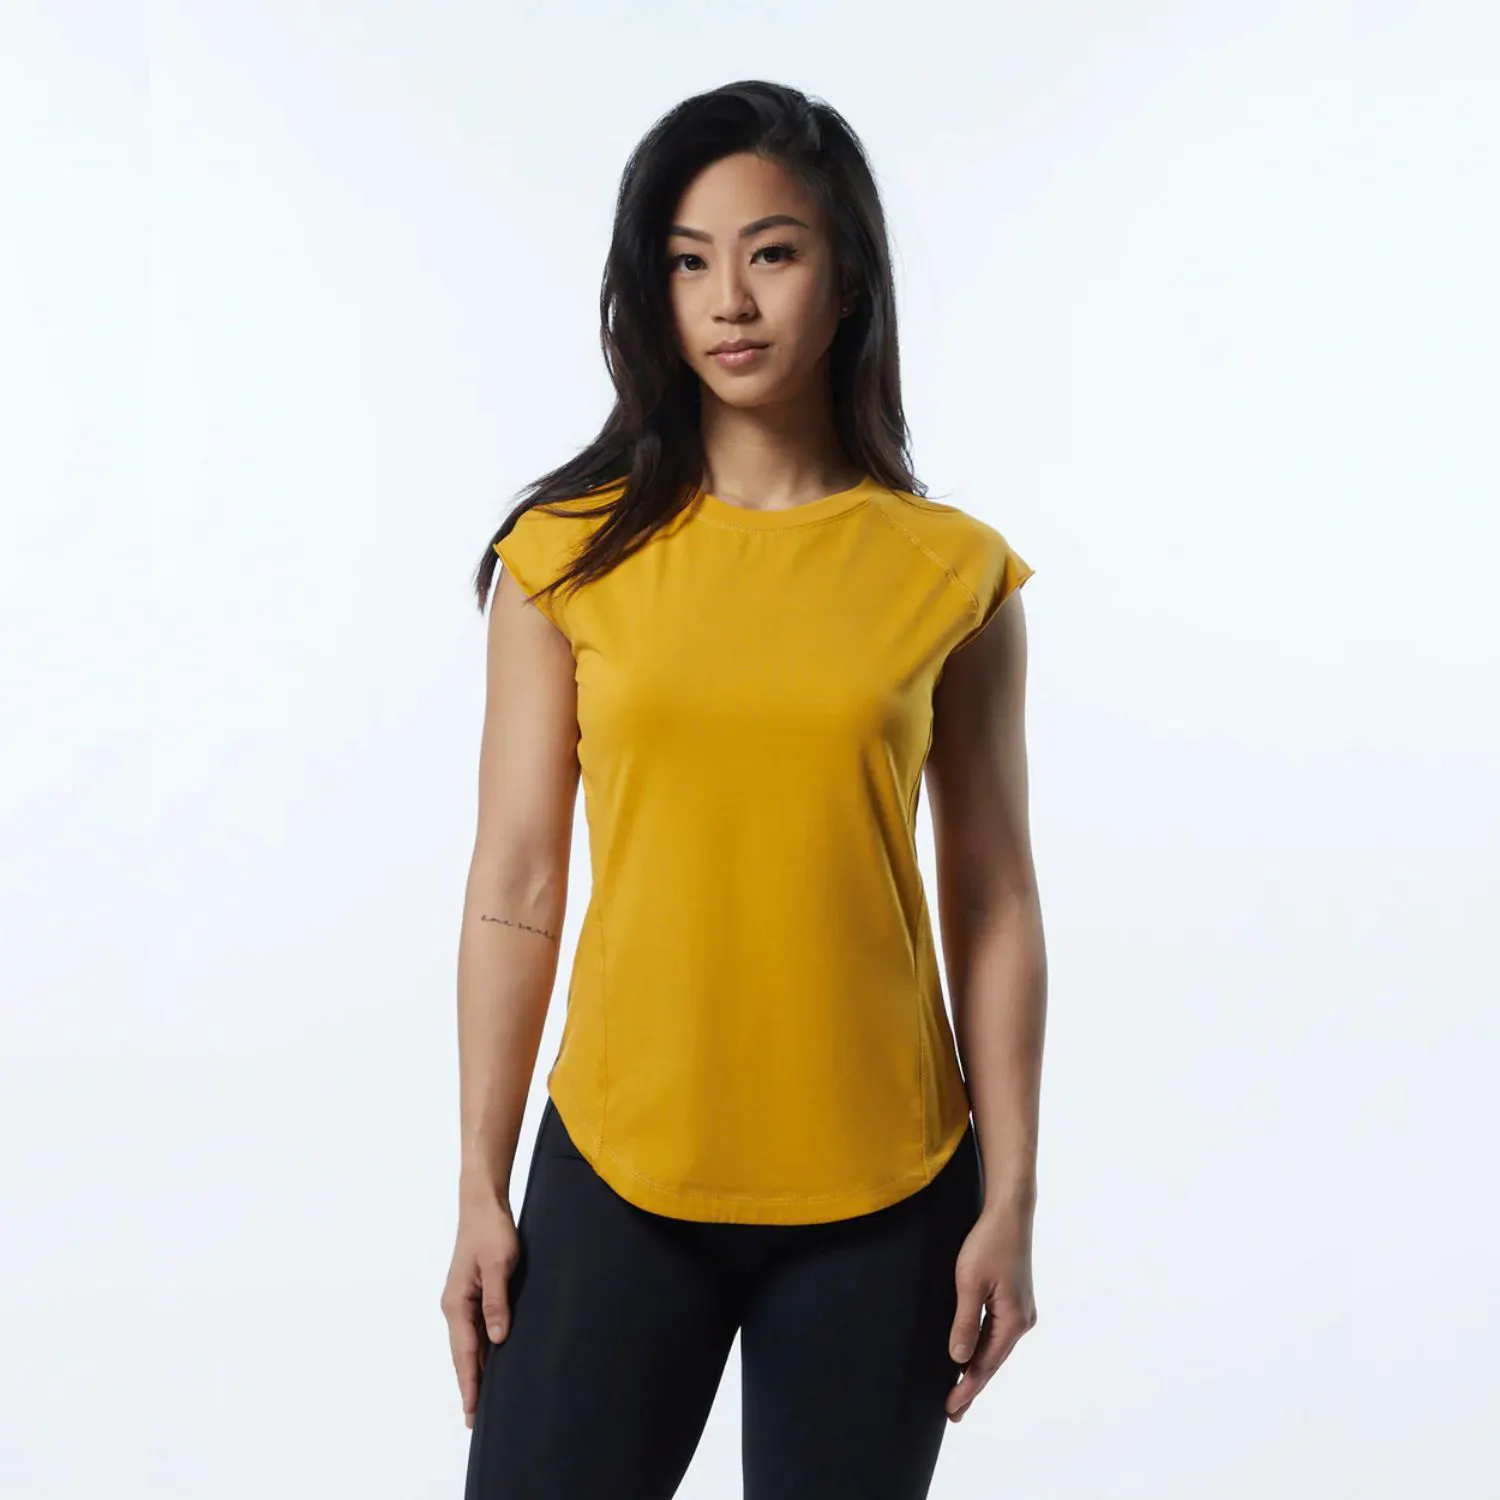 Performance Fit 95% Cotton 5% Spandex Fitted Cap Sleeves Raglan Shaped Crew Neckline Women Exotic Yellow T-Shirts with Scoop Hem